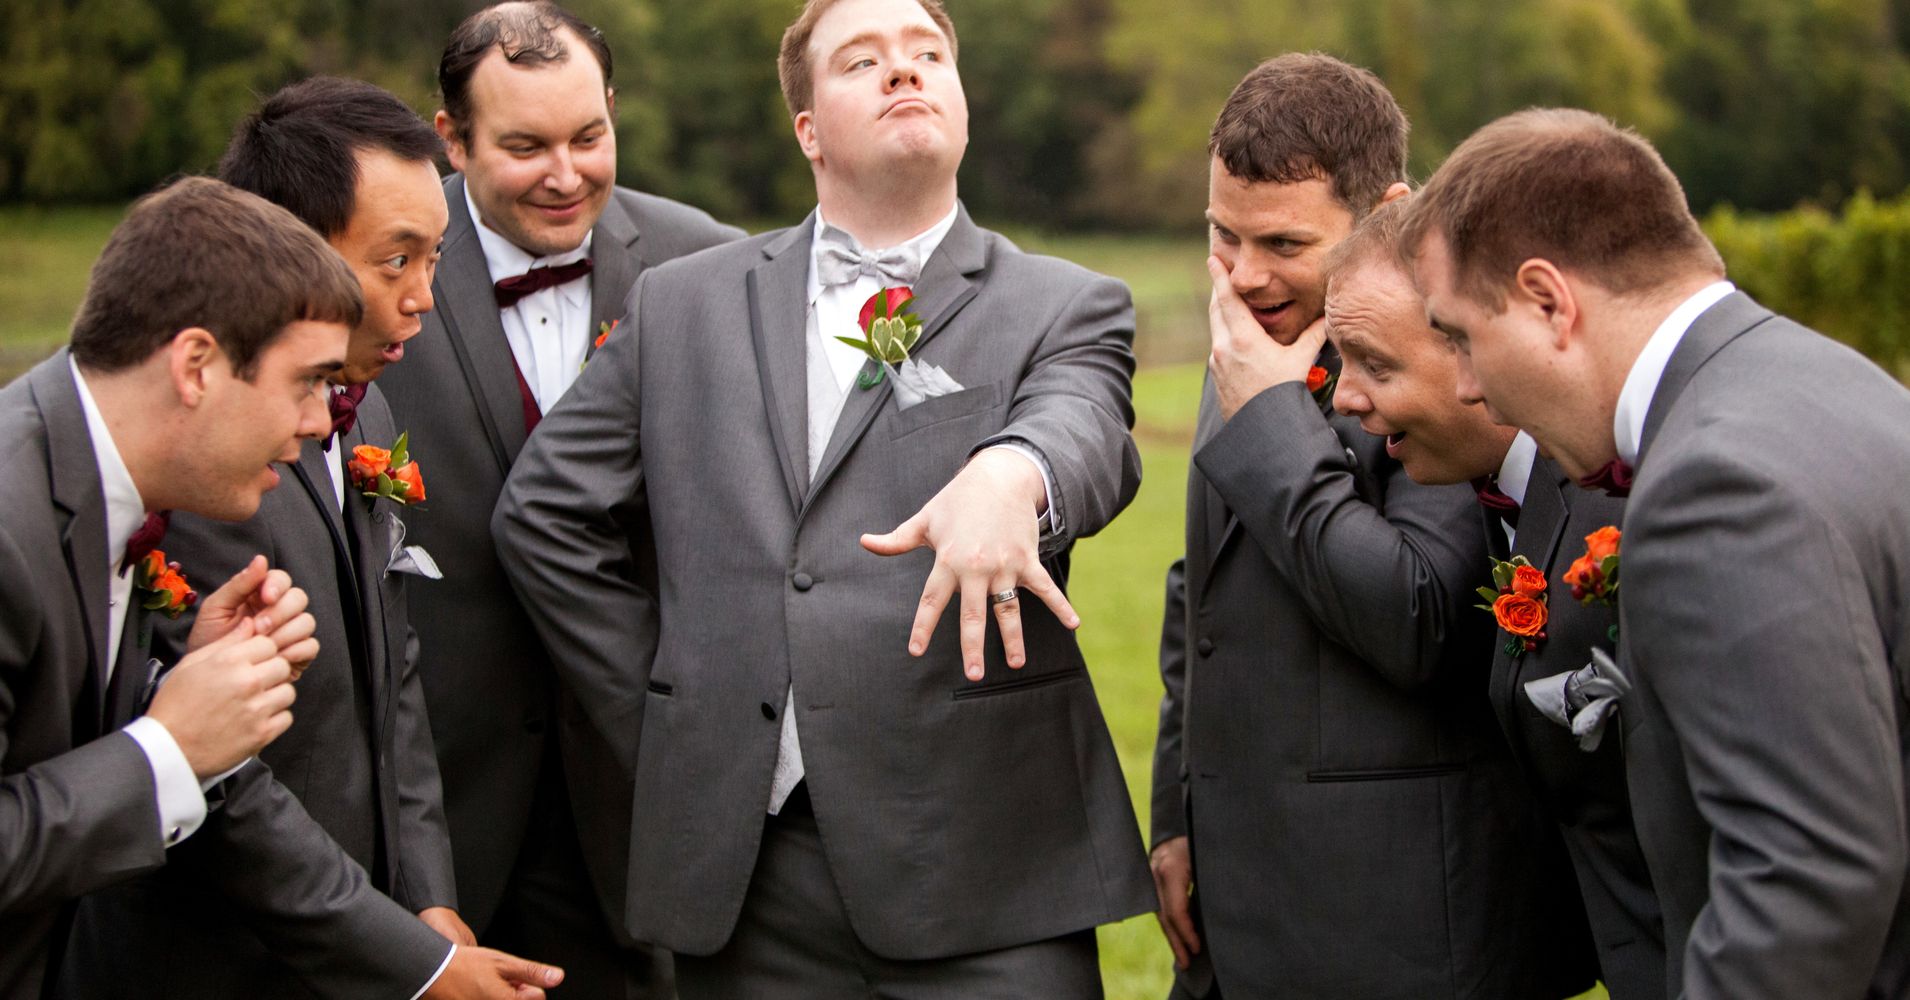 22 Fun Photo Ideas That Put The Party In Wedding Party Huffpost 